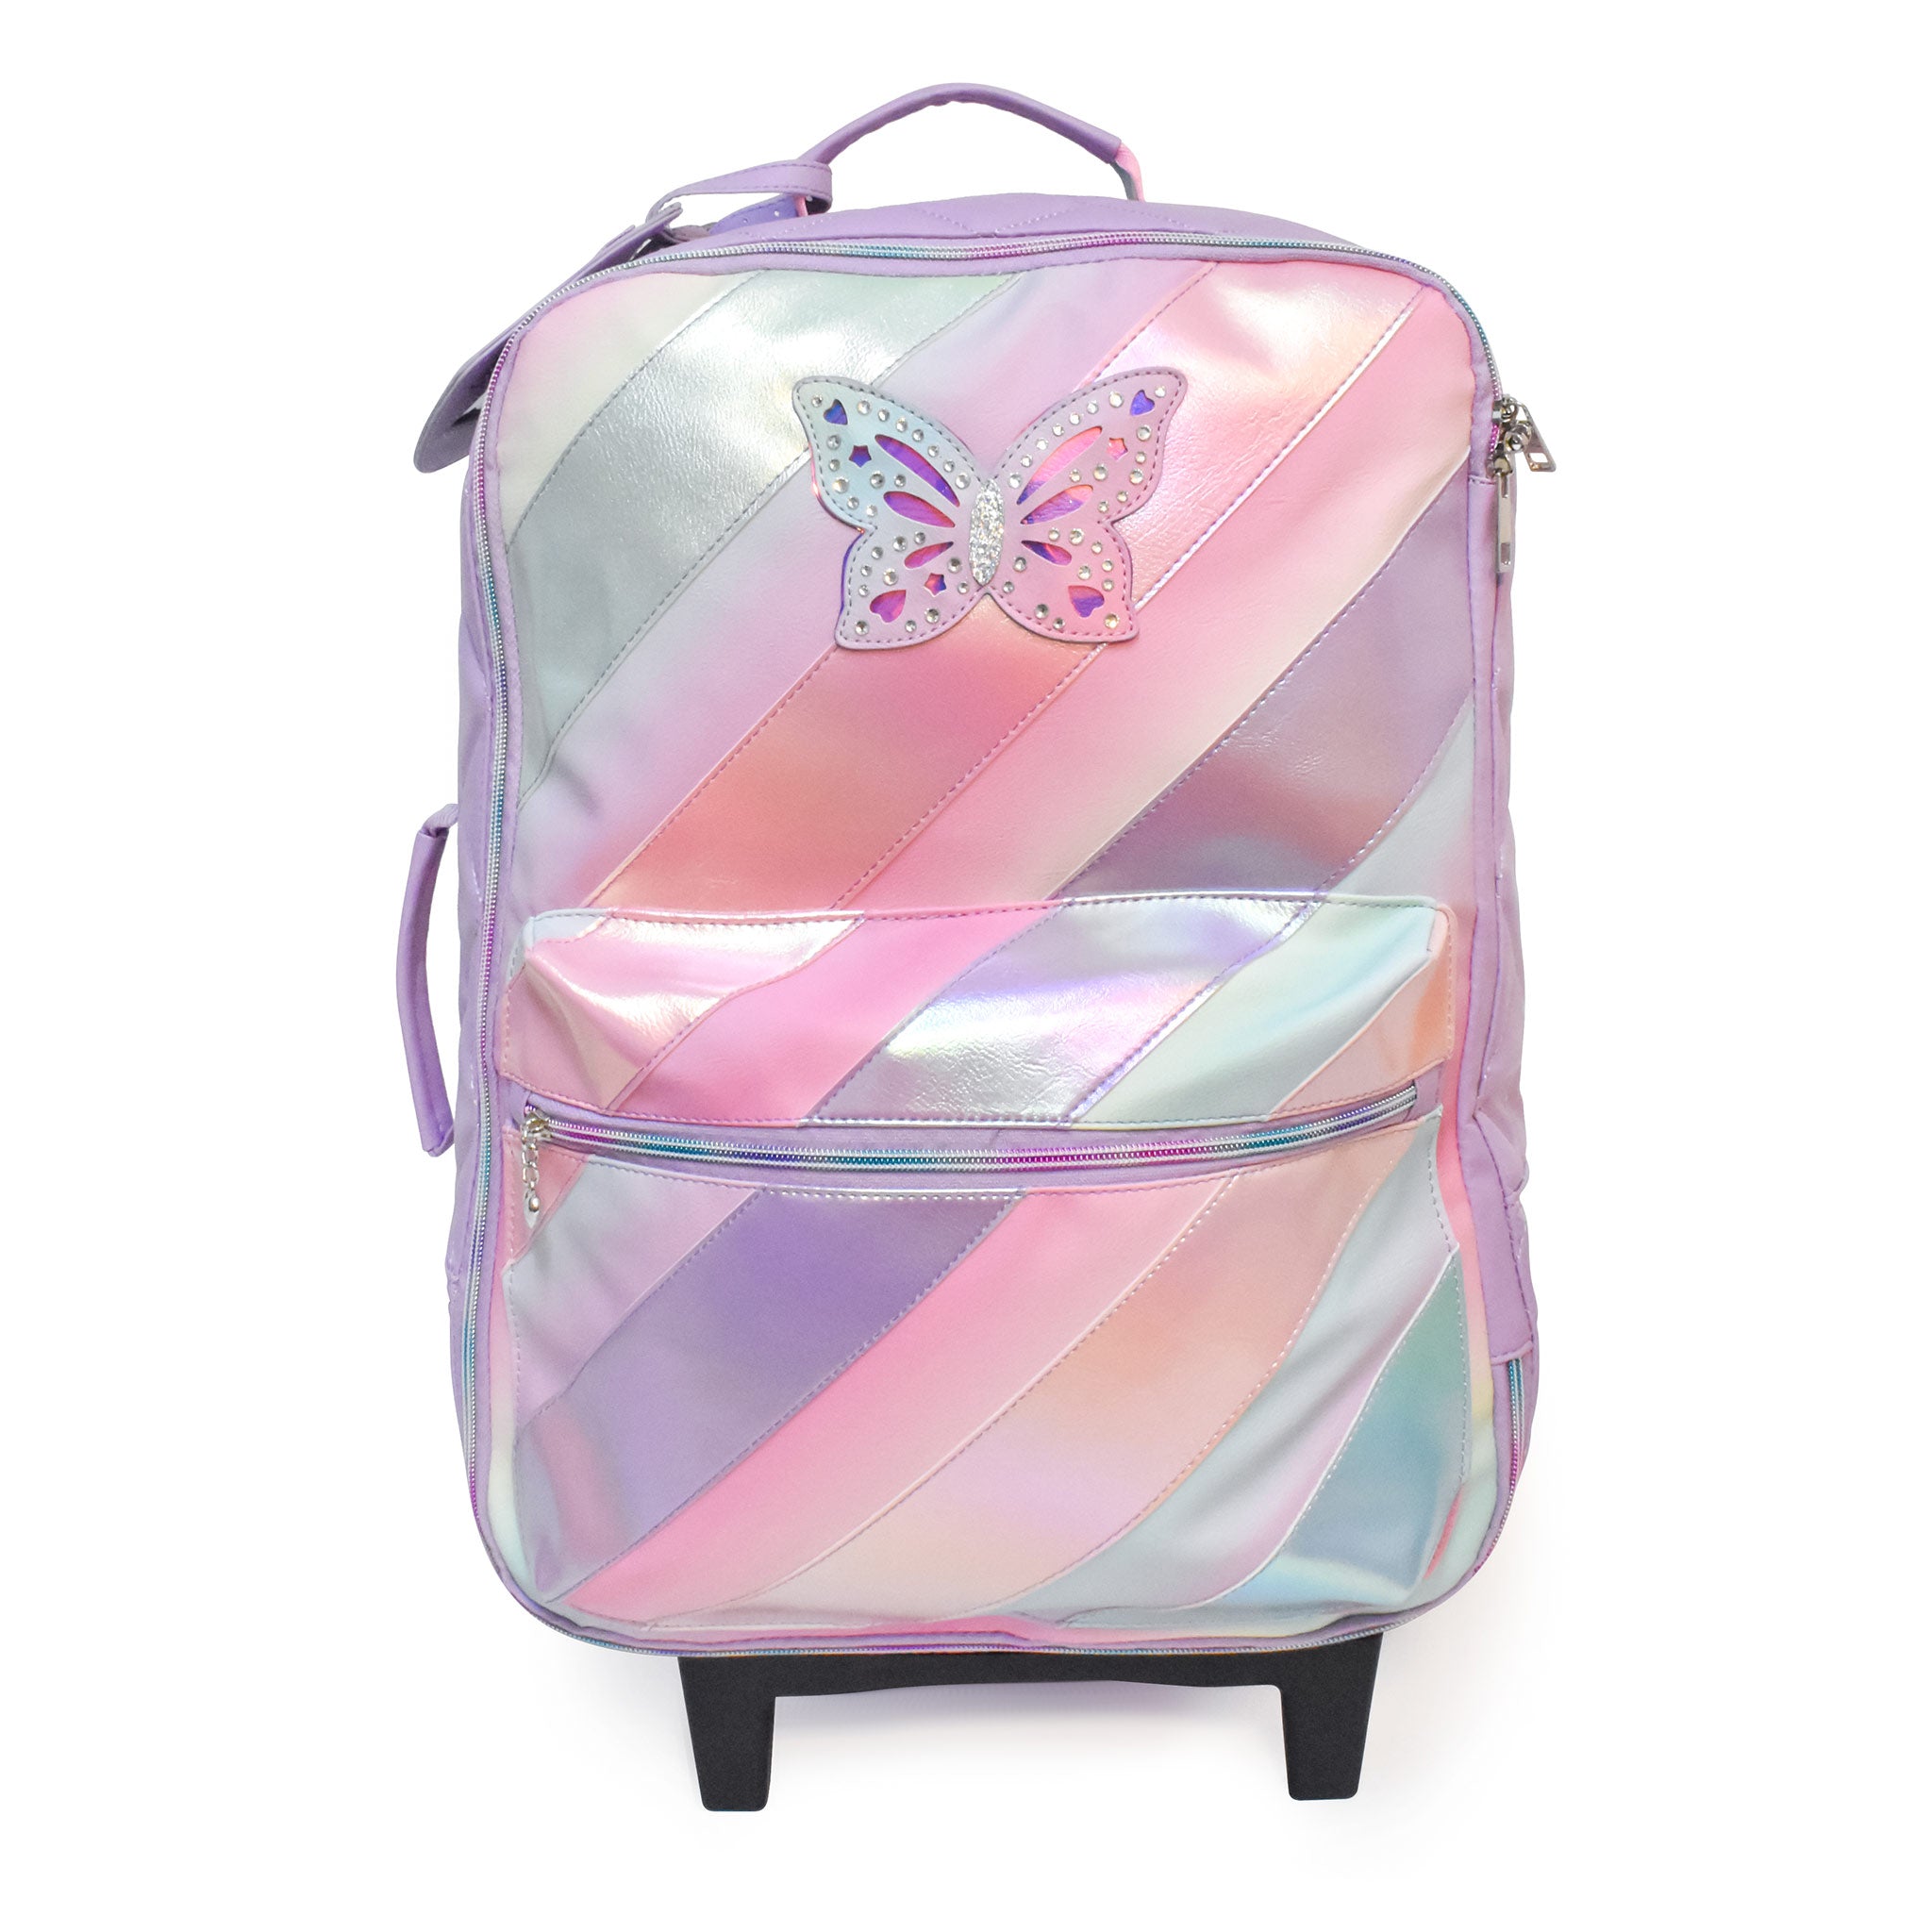 Front view of metallic striped rolling luggage with rhinestone butterfly patch and 'Travel' luggage tag